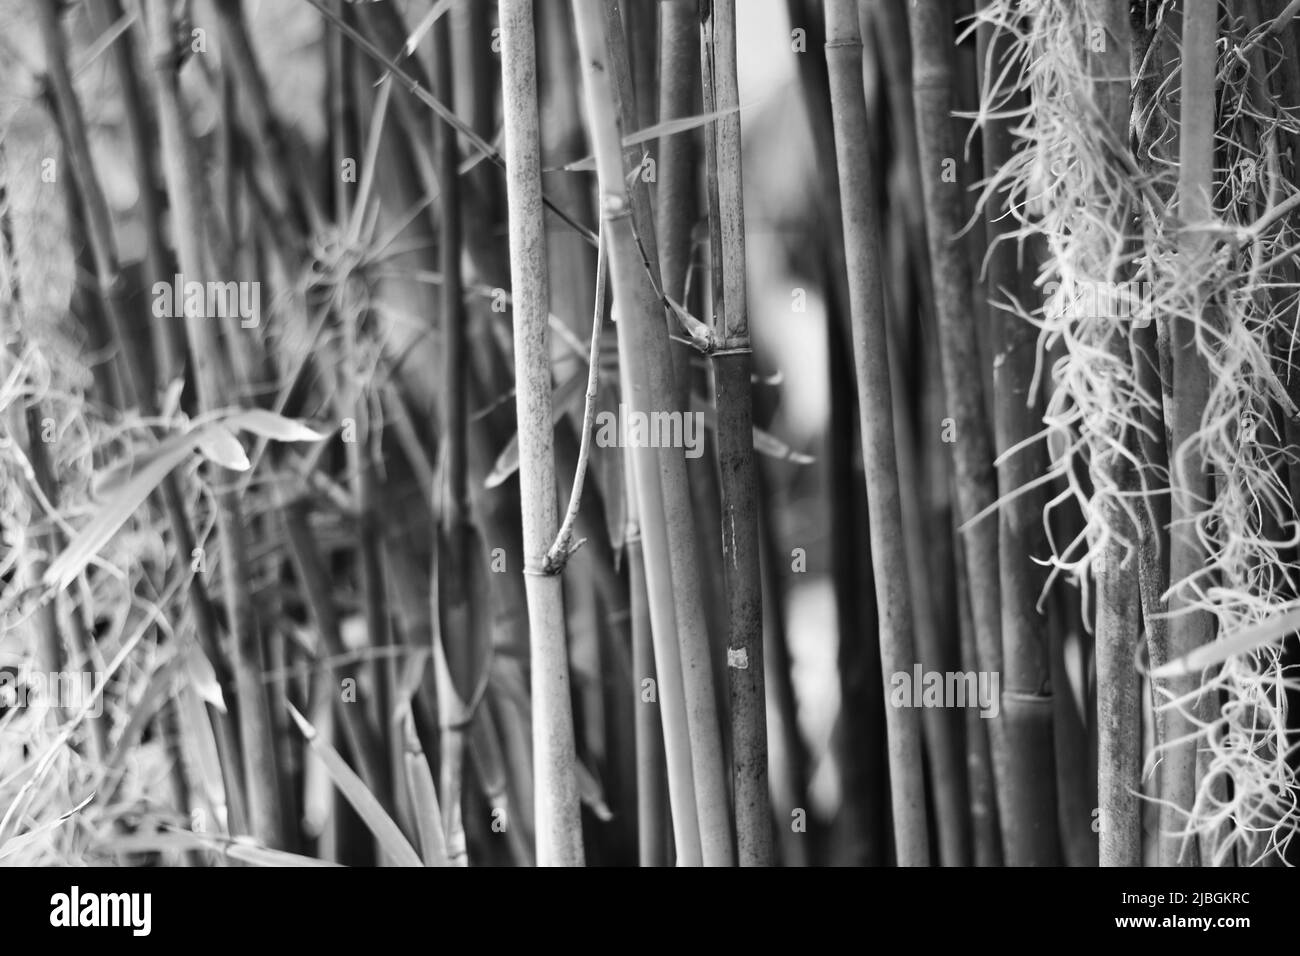 Lush tropical bamboo plants growing in the jungle in black and white ...